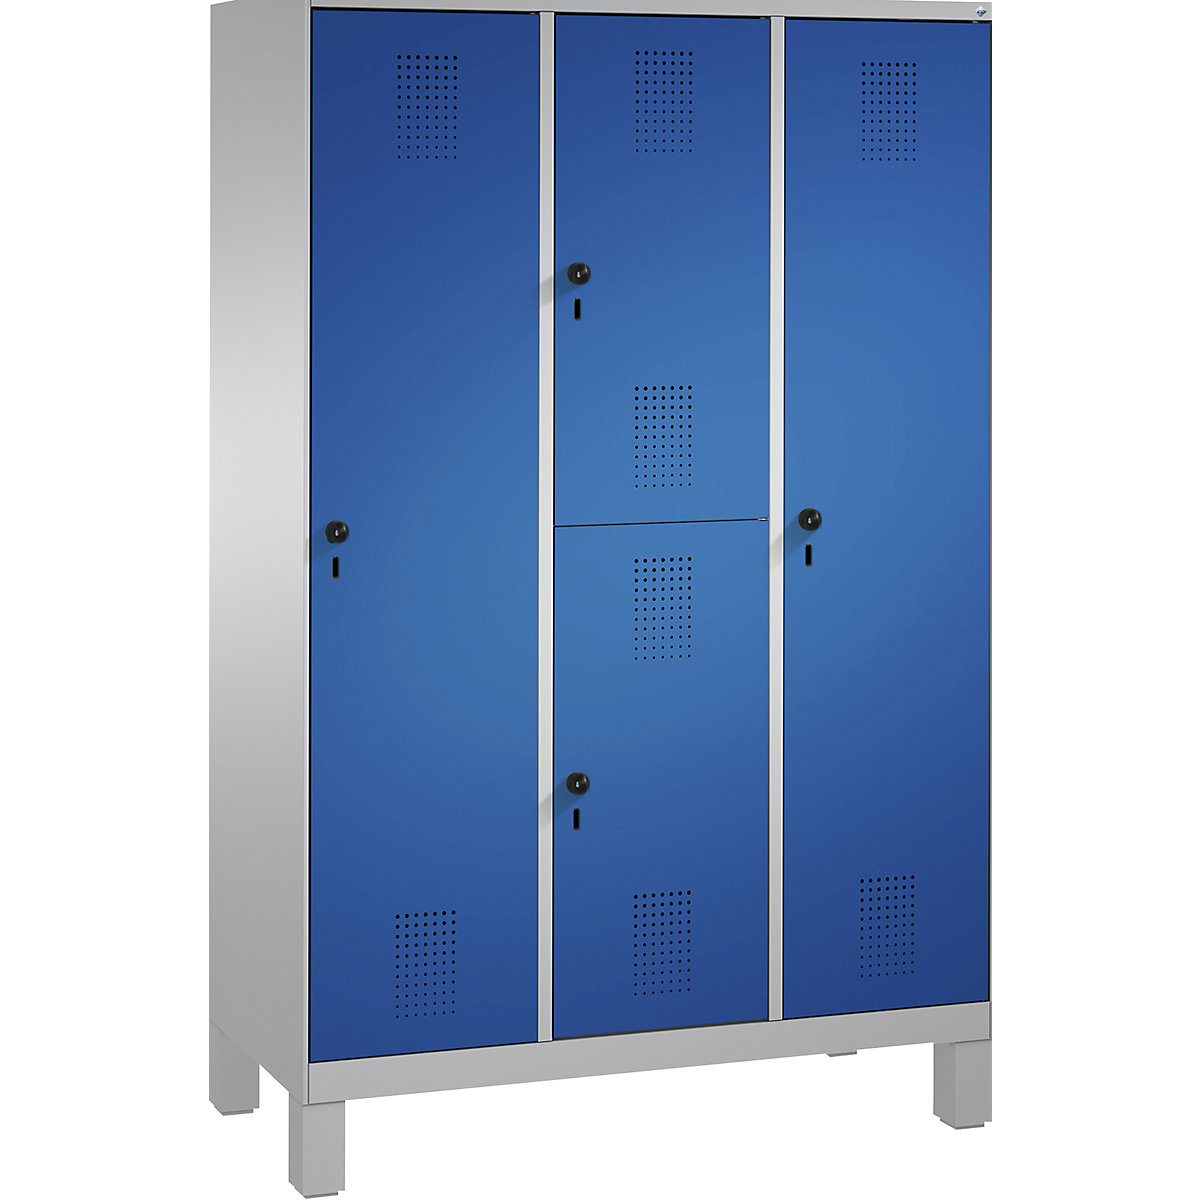 EVOLO combination cupboard, single and double tier – C+P, 3 compartments, 4 doors, compartment width 400 mm, with feet, white aluminium / gentian blue